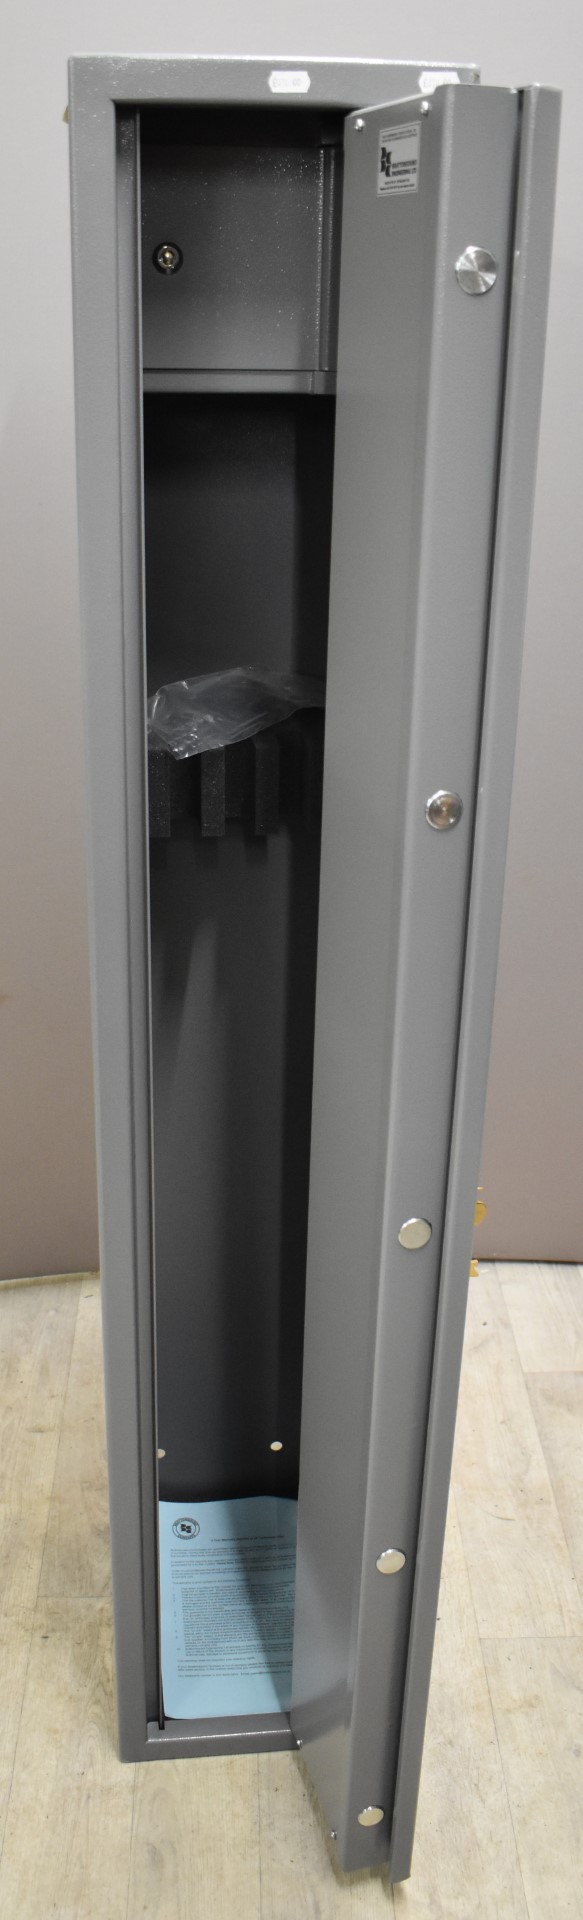 Brattonsound Engineering metal gun safe or cabinet with internal ammunition section, with keys and - Image 3 of 6